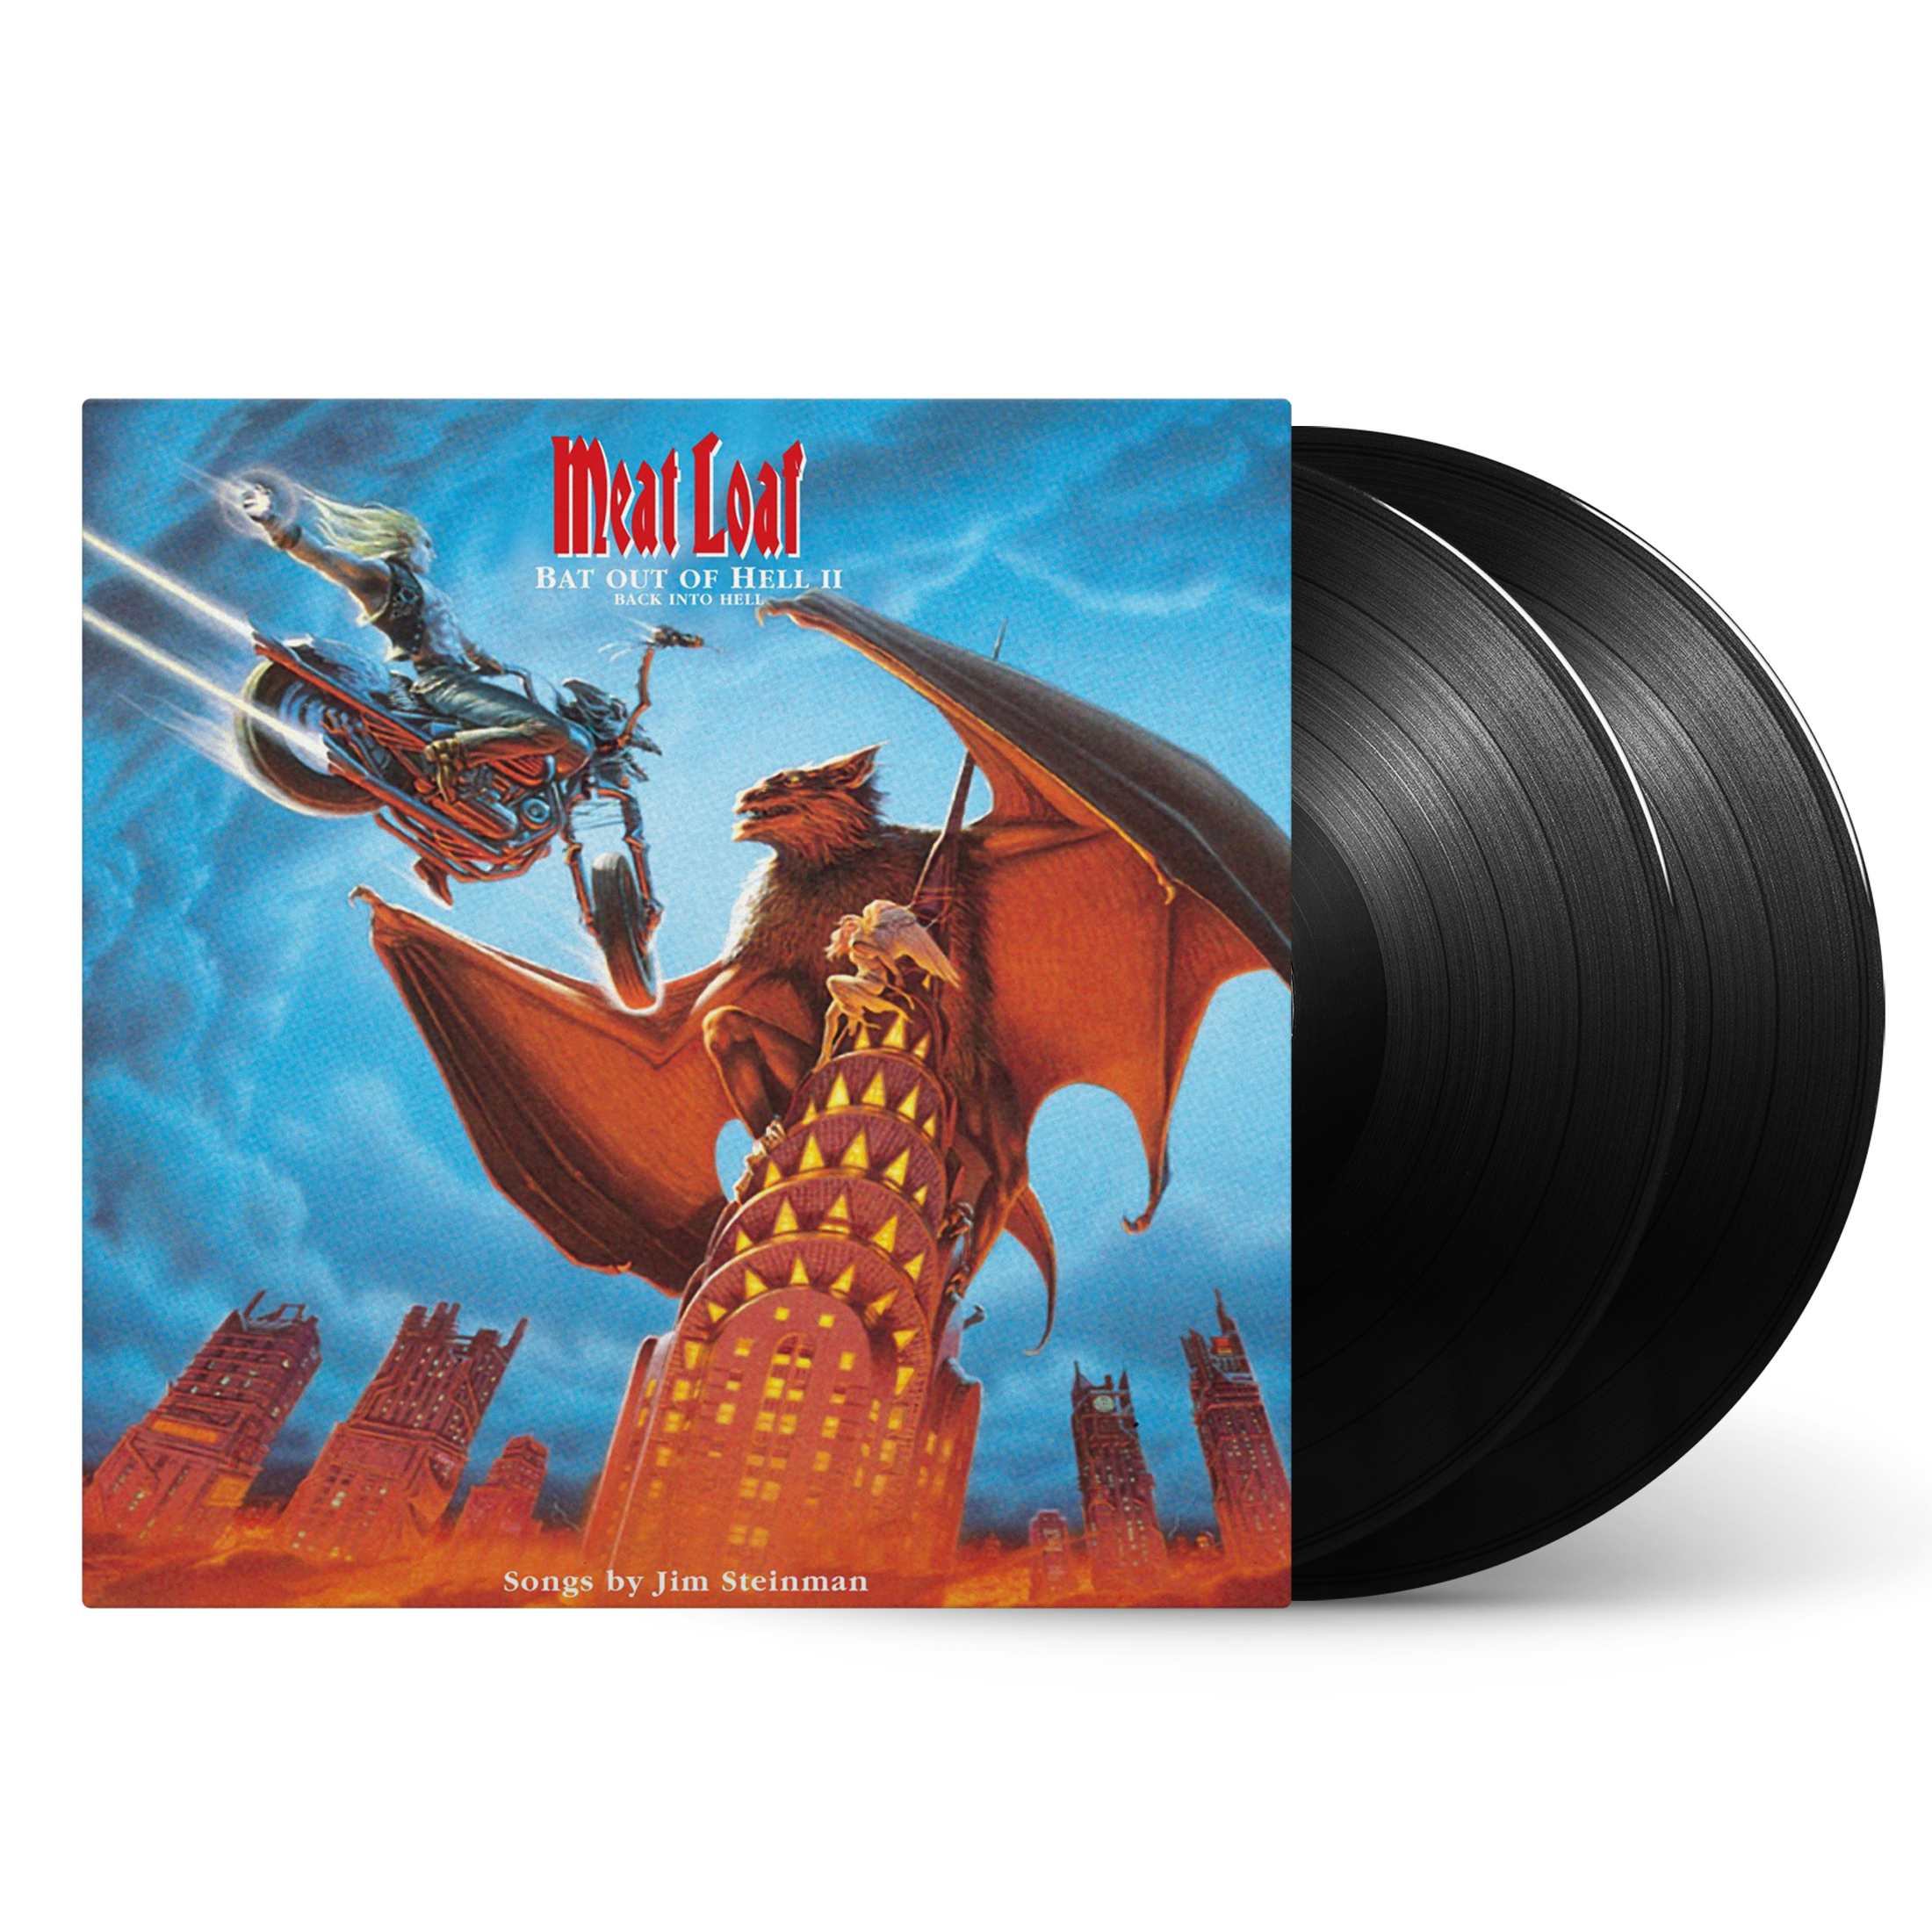 Meat Loaf - Bat Out Of Hell II - Back Into Hell: Vinyl 2LP